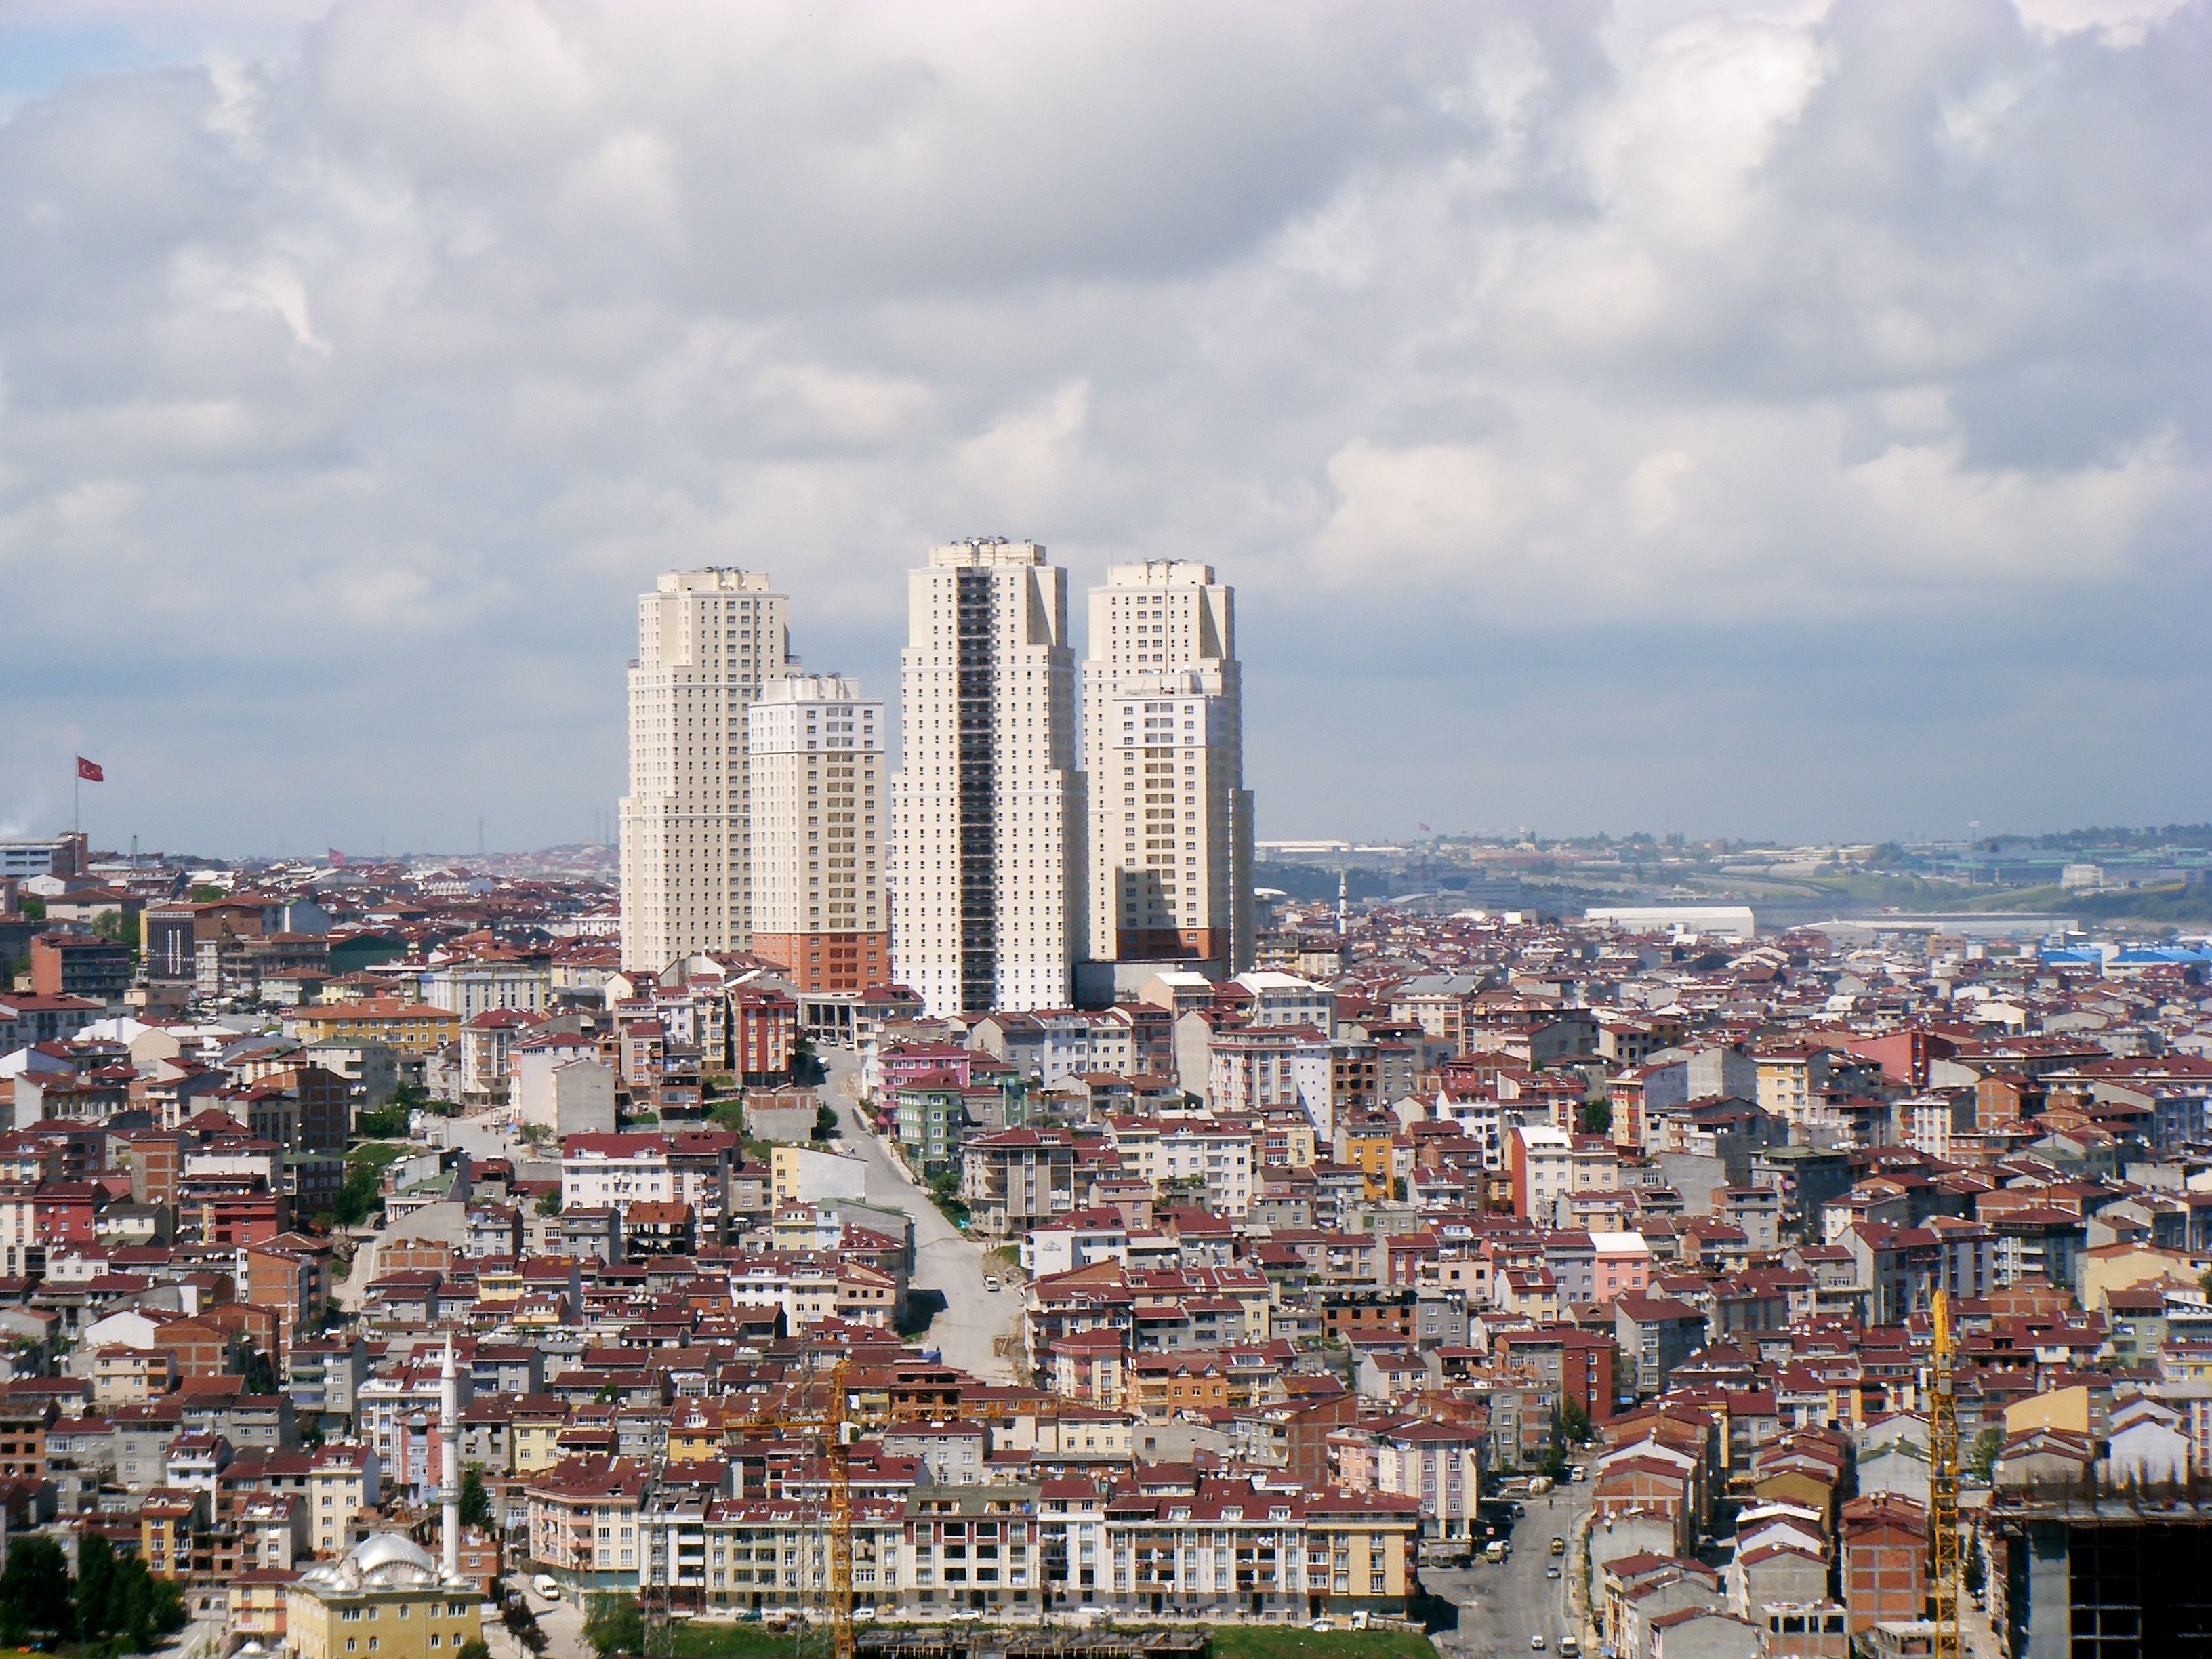 this picture is from istanbul turkey showing the juxtaposition between gecekondu slums for poor and high rises for rich people p istanbul tasarim turkiye